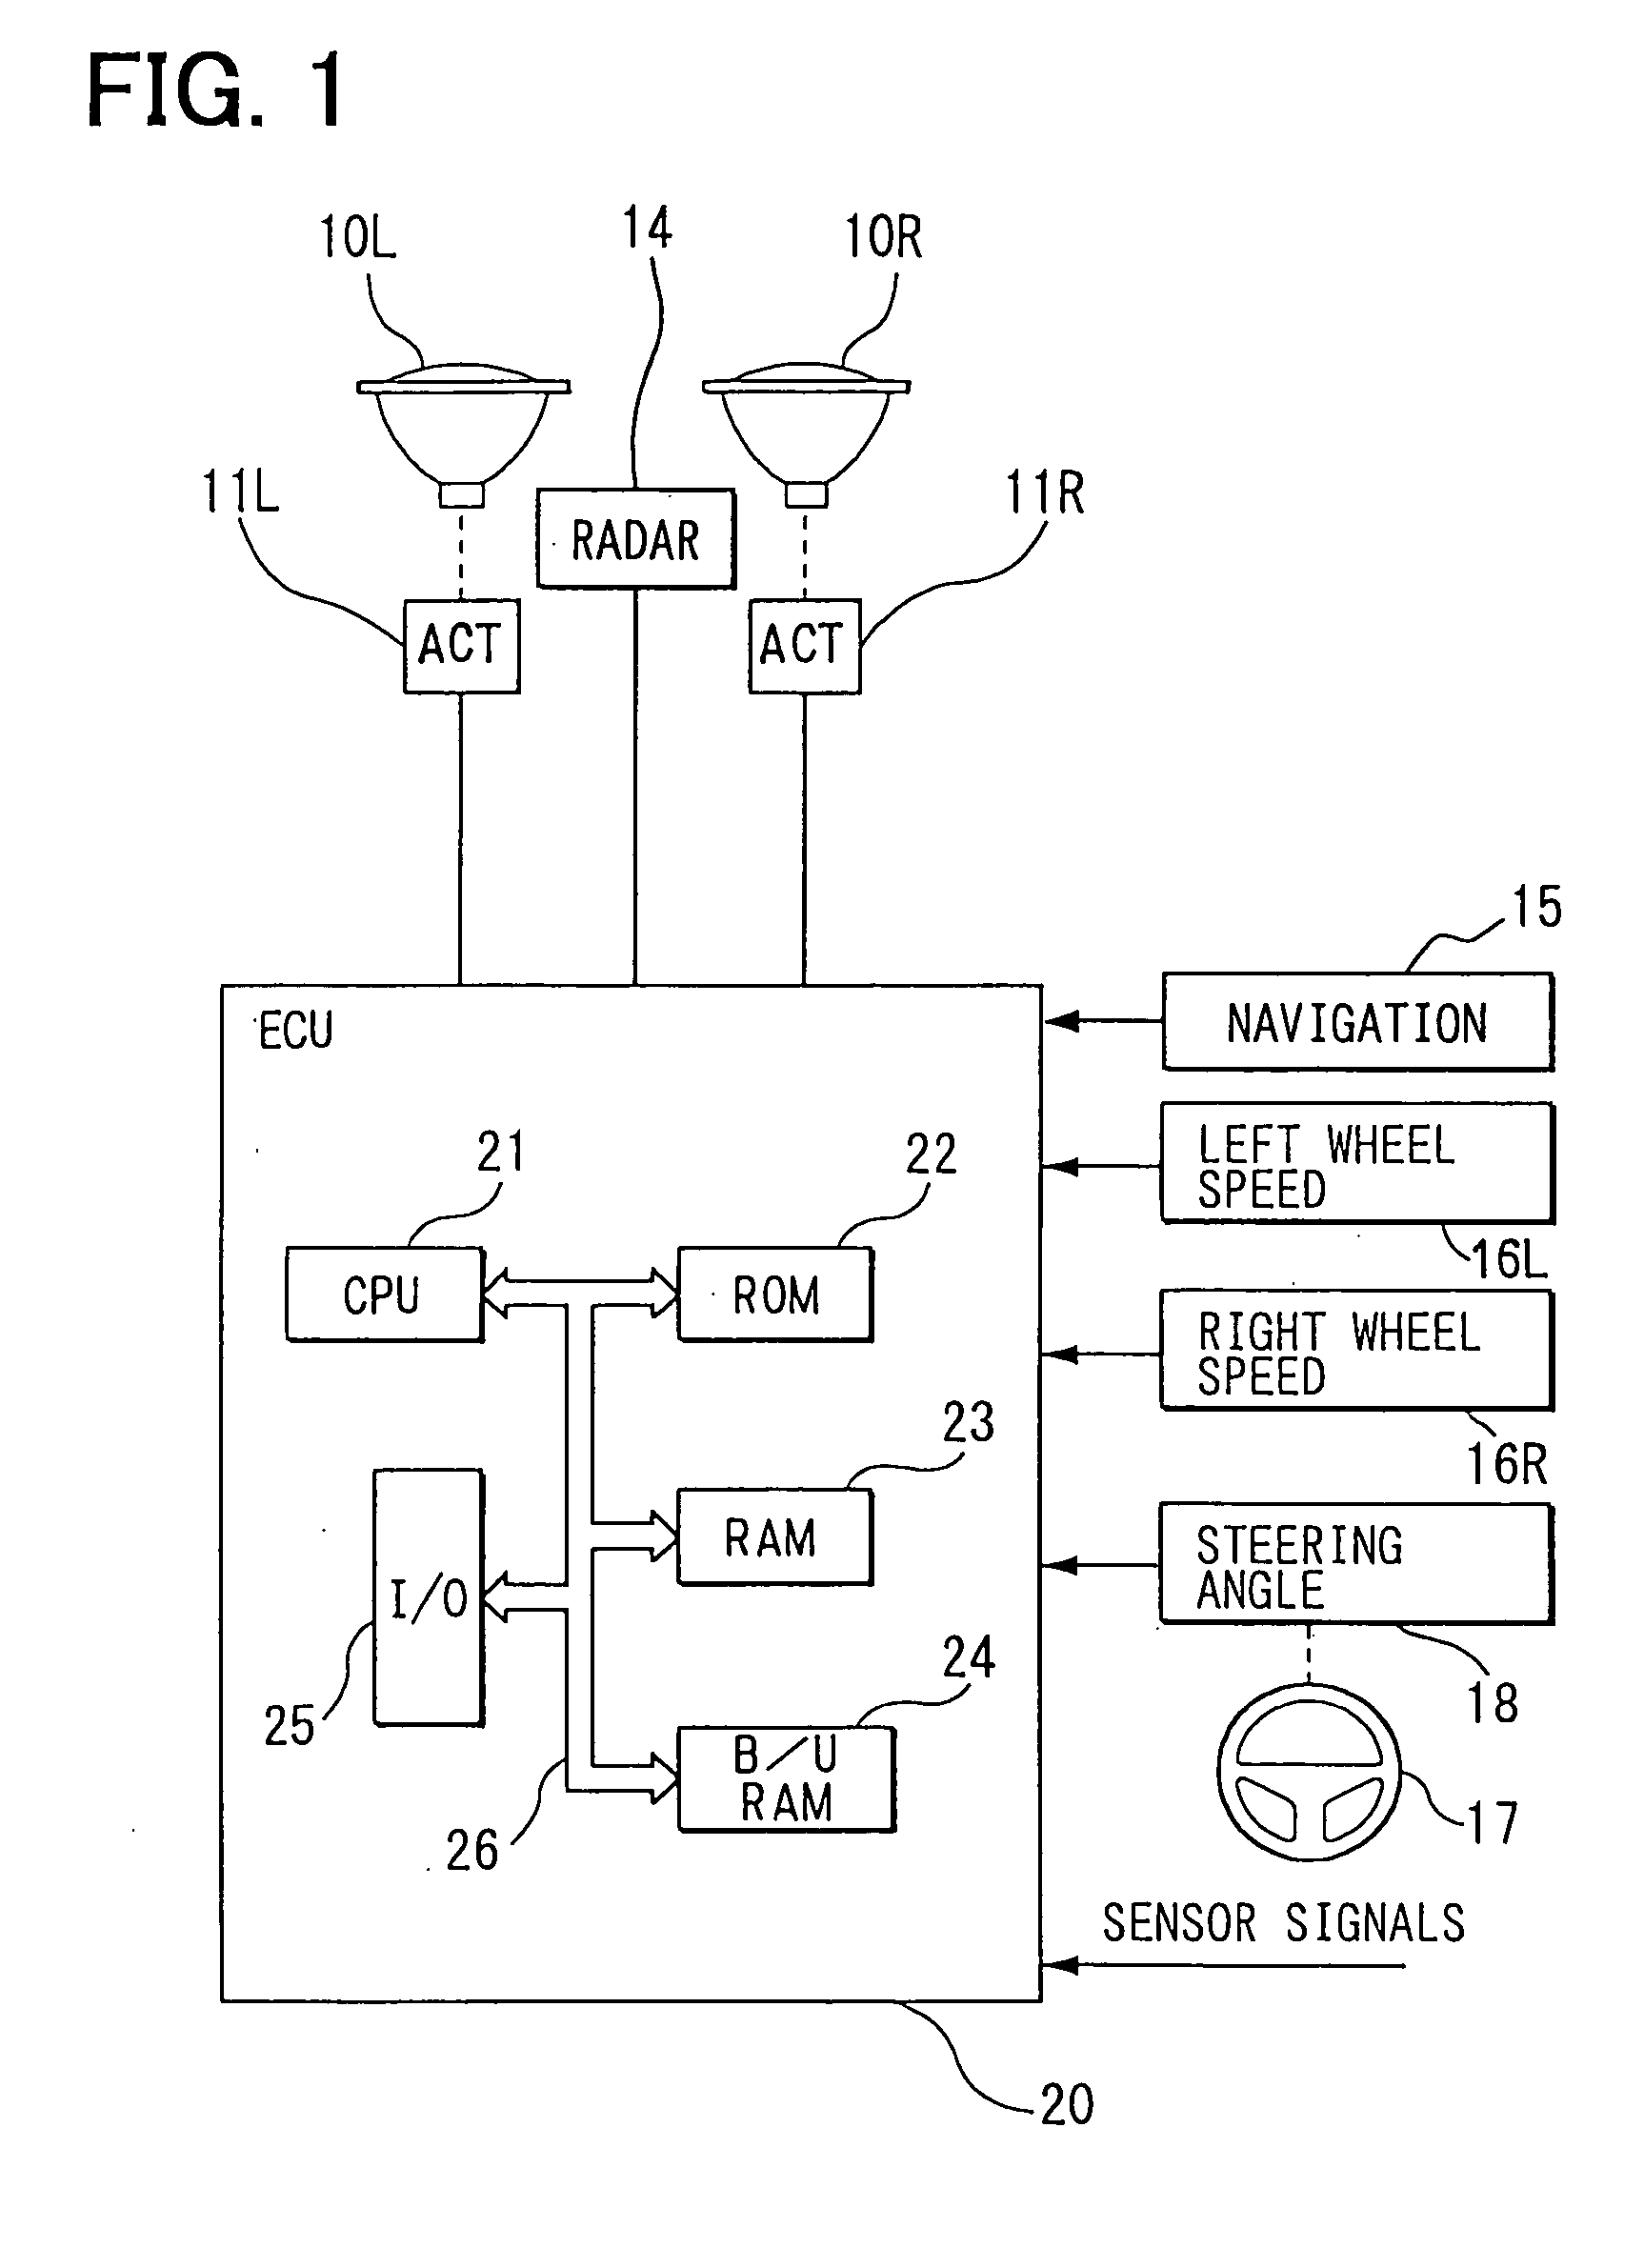 Automatic optical axis direction adjusting device for vehicle headlight